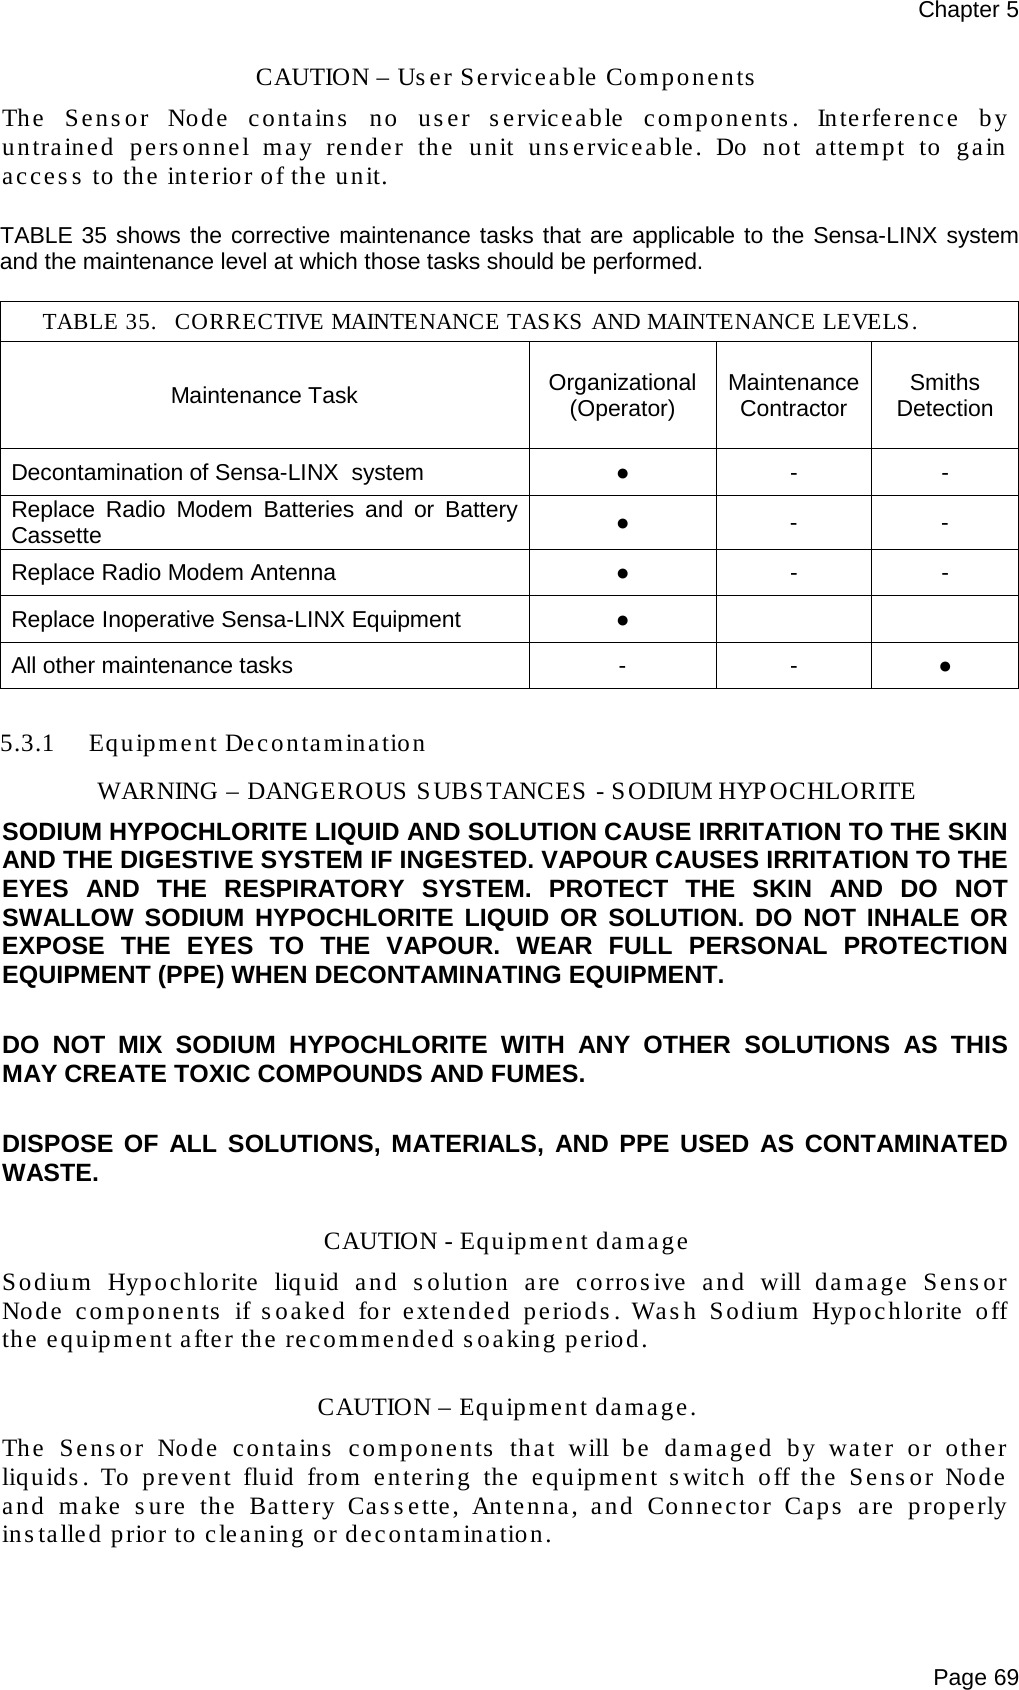 Chapter 5 Page 69 CAUTION – User Serviceable Components The Sensor Node contains no user serviceable components. Interference by untrained personnel may render the unit unserviceable. Do not attempt to gain access to the interior of the unit.  TABLE 35 shows the corrective maintenance tasks that are applicable to the Sensa-LINX system and the maintenance level at which those tasks should be performed.  TABLE 35. CORRECTIVE MAINTENANCE TASKS AND MAINTENANCE LEVELS. Maintenance Task Organizational (Operator) Maintenance Contractor Smiths Detection Decontamination of Sensa-LINX  system ●  -  - Replace Radio Modem Batteries and or Battery Cassette ●  -  - Replace Radio Modem Antenna ●  -  - Replace Inoperative Sensa-LINX Equipment ●     All other maintenance tasks  -  -  ●  5.3.1 Equipment Decontamination WARNING – DANGEROUS SUBSTANCES - SODIUM HYPOCHLORITE SODIUM HYPOCHLORITE LIQUID AND SOLUTION CAUSE IRRITATION TO THE SKIN AND THE DIGESTIVE SYSTEM IF INGESTED. VAPOUR CAUSES IRRITATION TO THE EYES AND THE RESPIRATORY SYSTEM. PROTECT THE SKIN AND DO NOT SWALLOW SODIUM HYPOCHLORITE LIQUID OR SOLUTION. DO NOT INHALE OR EXPOSE THE EYES TO THE VAPOUR. WEAR FULL PERSONAL PROTECTION EQUIPMENT (PPE) WHEN DECONTAMINATING EQUIPMENT.  DO NOT MIX SODIUM HYPOCHLORITE WITH ANY OTHER SOLUTIONS AS THIS MAY CREATE TOXIC COMPOUNDS AND FUMES.  DISPOSE OF ALL SOLUTIONS, MATERIALS, AND PPE USED AS CONTAMINATED WASTE.  CAUTION - Equipment damage Sodium Hypochlorite liquid and solution are corrosive and will damage Sensor Node components if soaked for extended periods. Wash Sodium Hypochlorite off the equipment after the recommended soaking period.  CAUTION – Equipment damage. The Sensor Node contains components that will be damaged by water or other liquids. To prevent fluid from entering the equipment switch off the Sensor Node and make sure the Battery Cassette, Antenna, and Connector Caps are properly installed prior to cleaning or decontamination.  